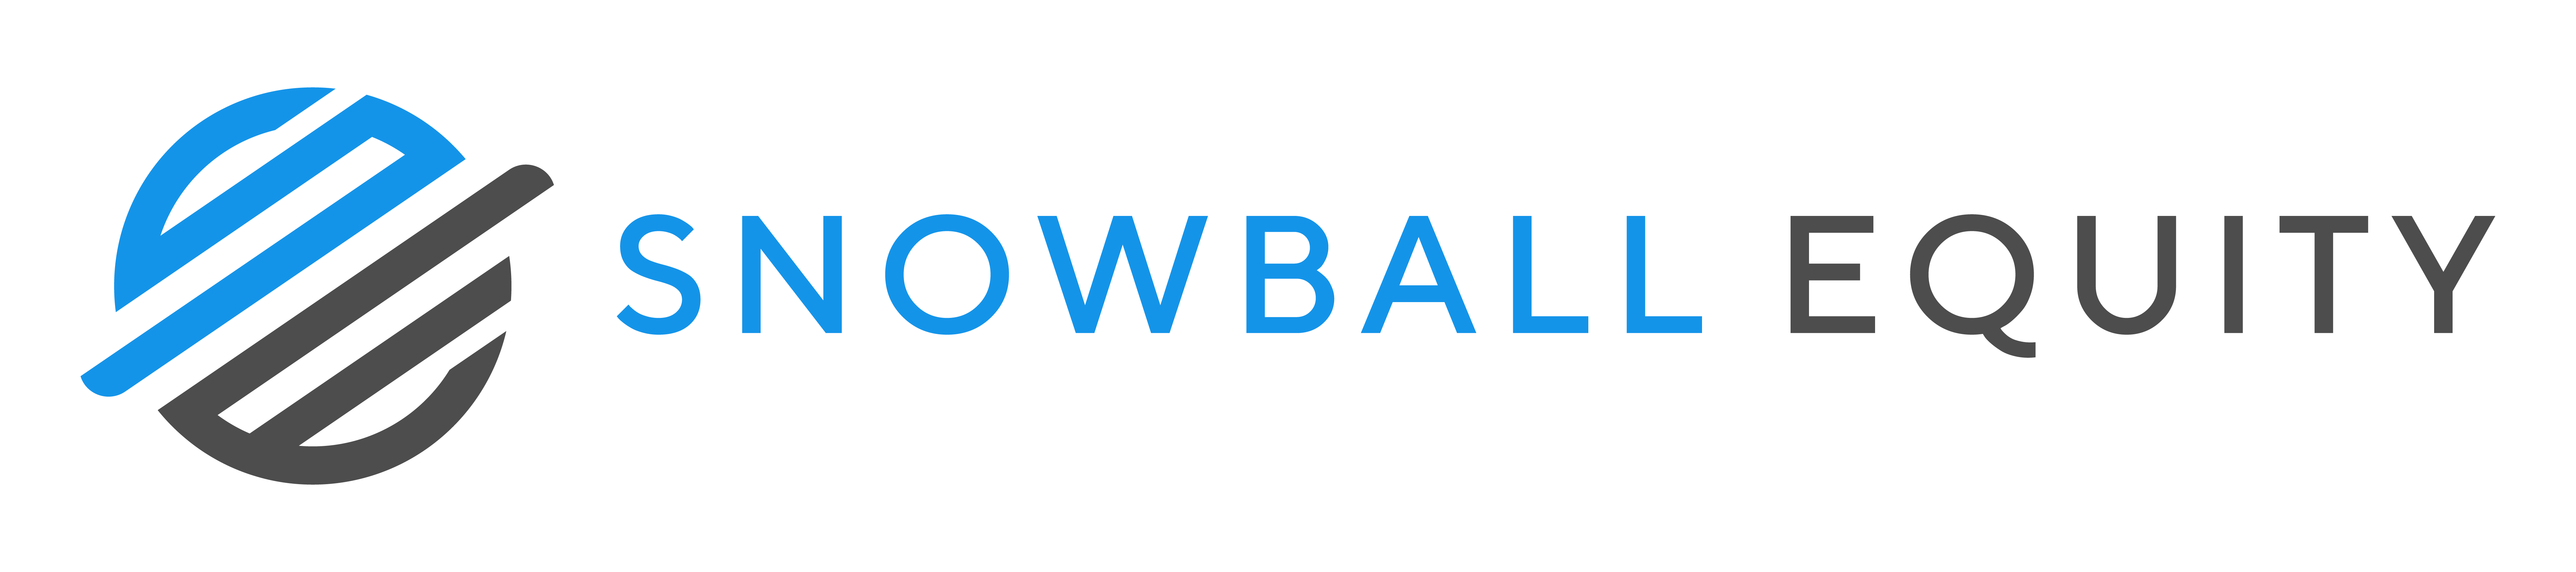 Snowball Equity